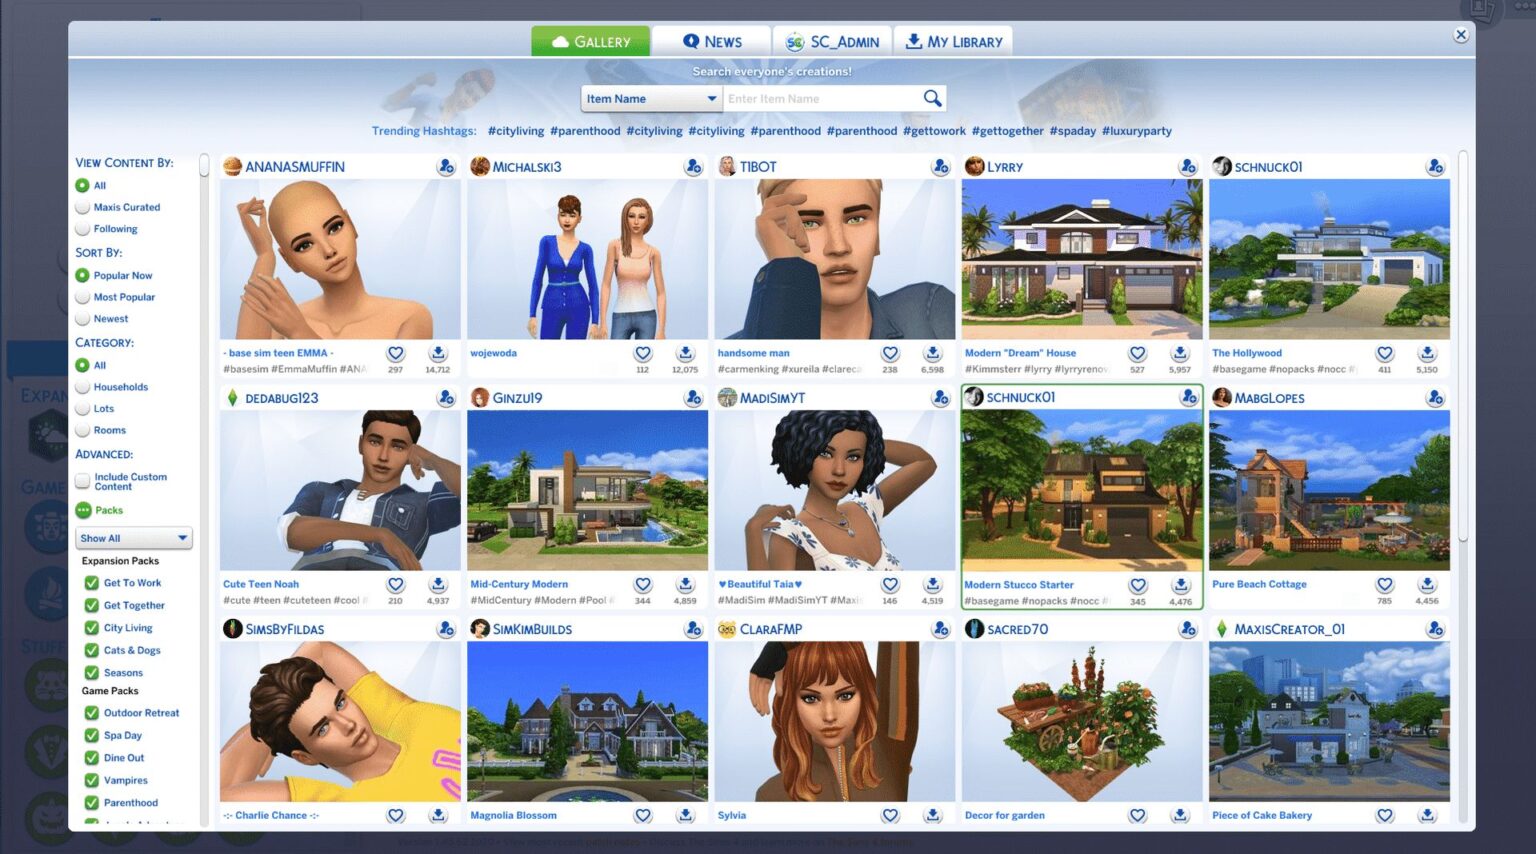 Sims 4 gallery not working How to fix connecting issues? • TechBriefly